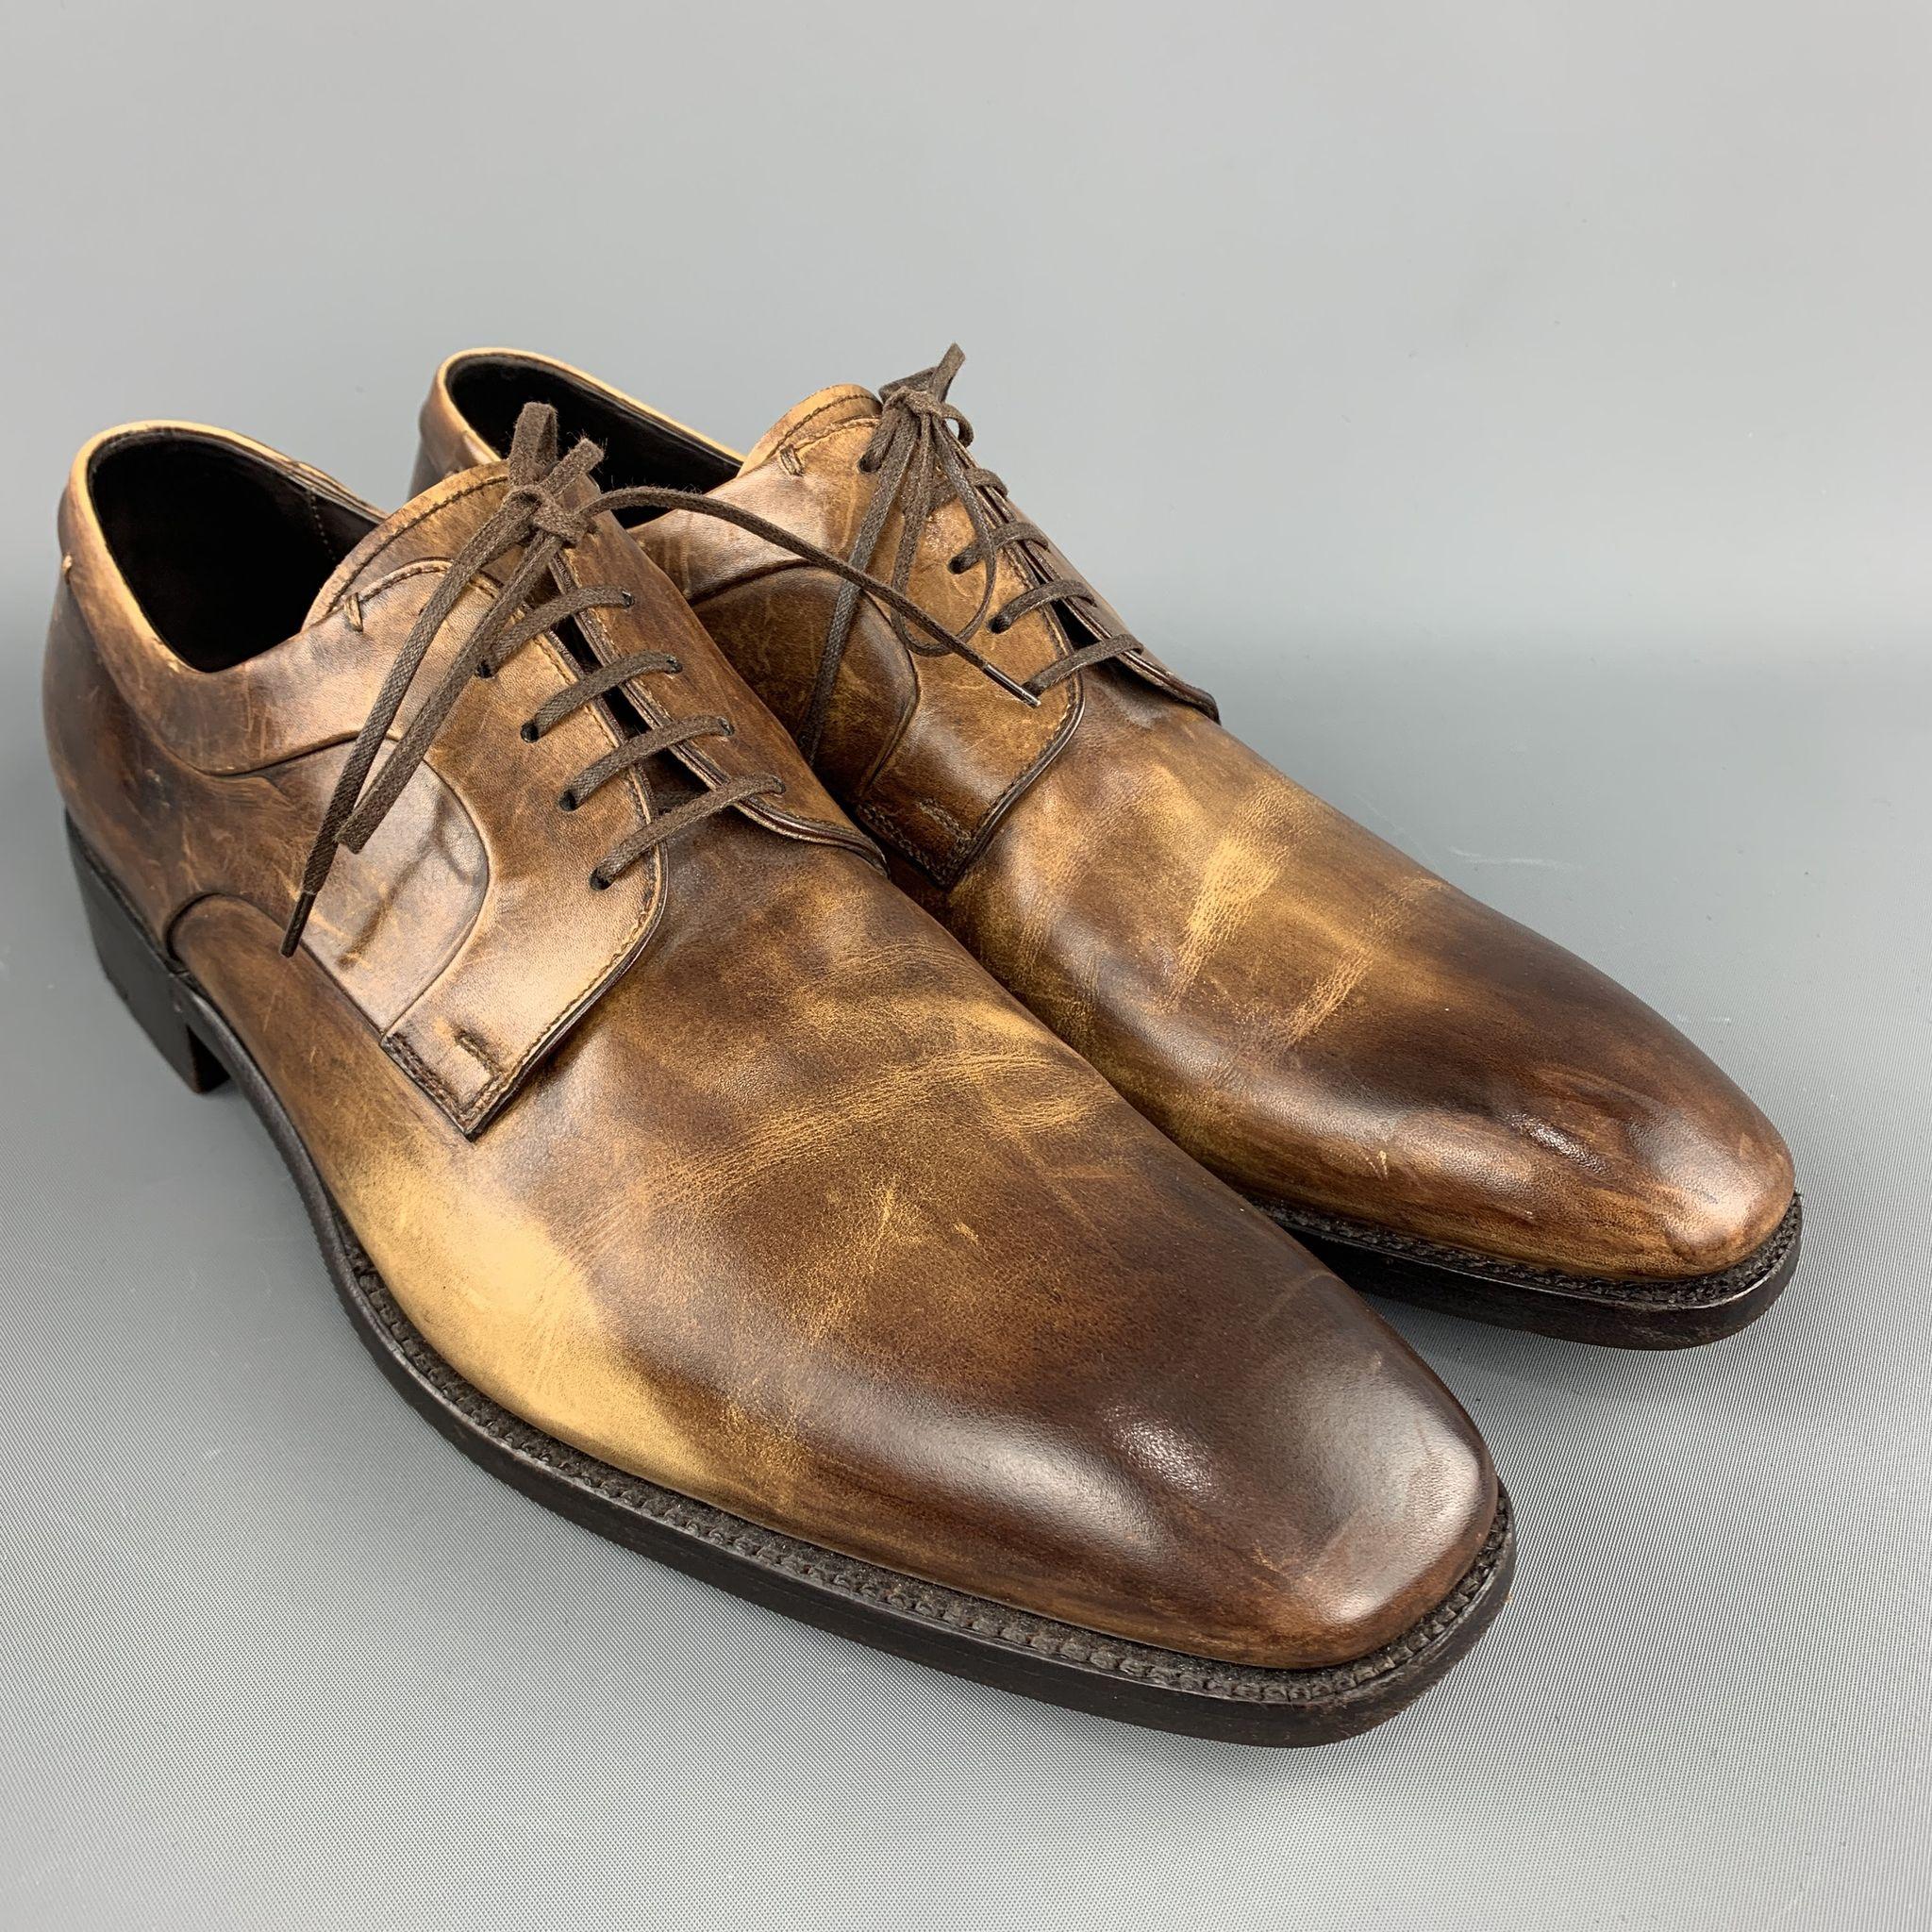 ERMENEGILDO ZEGNA dress shoes come in brown antique effect leather with a squared off toe. Made in Italy.
 
Very Good Pre-Owned Condition.
Marked: 10.5 D
 
Outsole: 12.5 x 4 in.